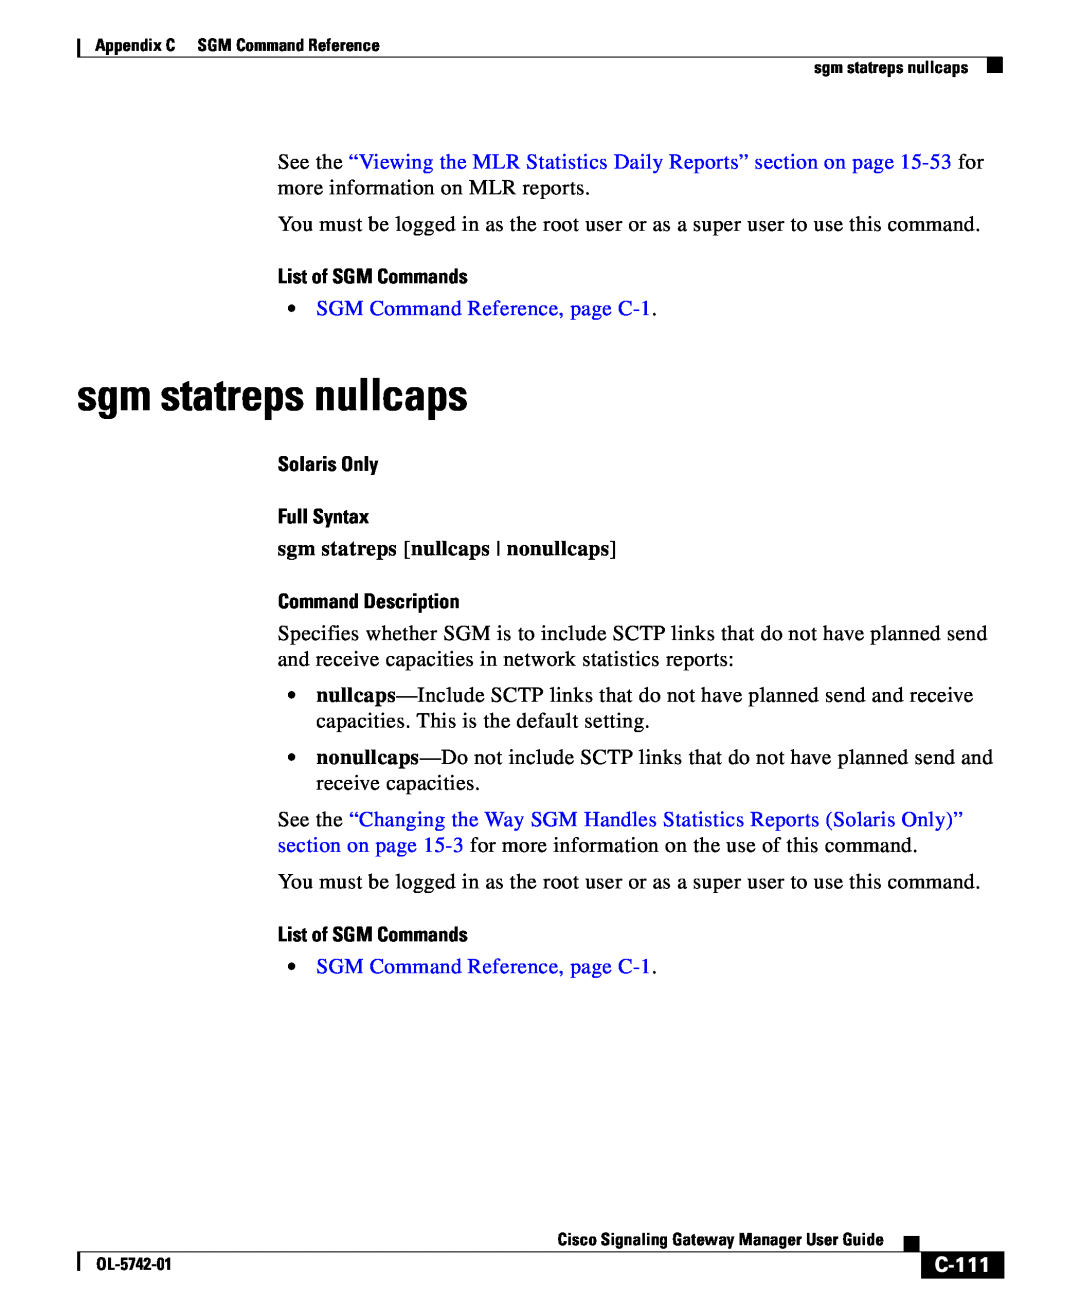 Cisco Systems OL-5742-01 appendix sgm statreps nullcaps, C-111, List of SGM Commands, SGM Command Reference, page C-1 